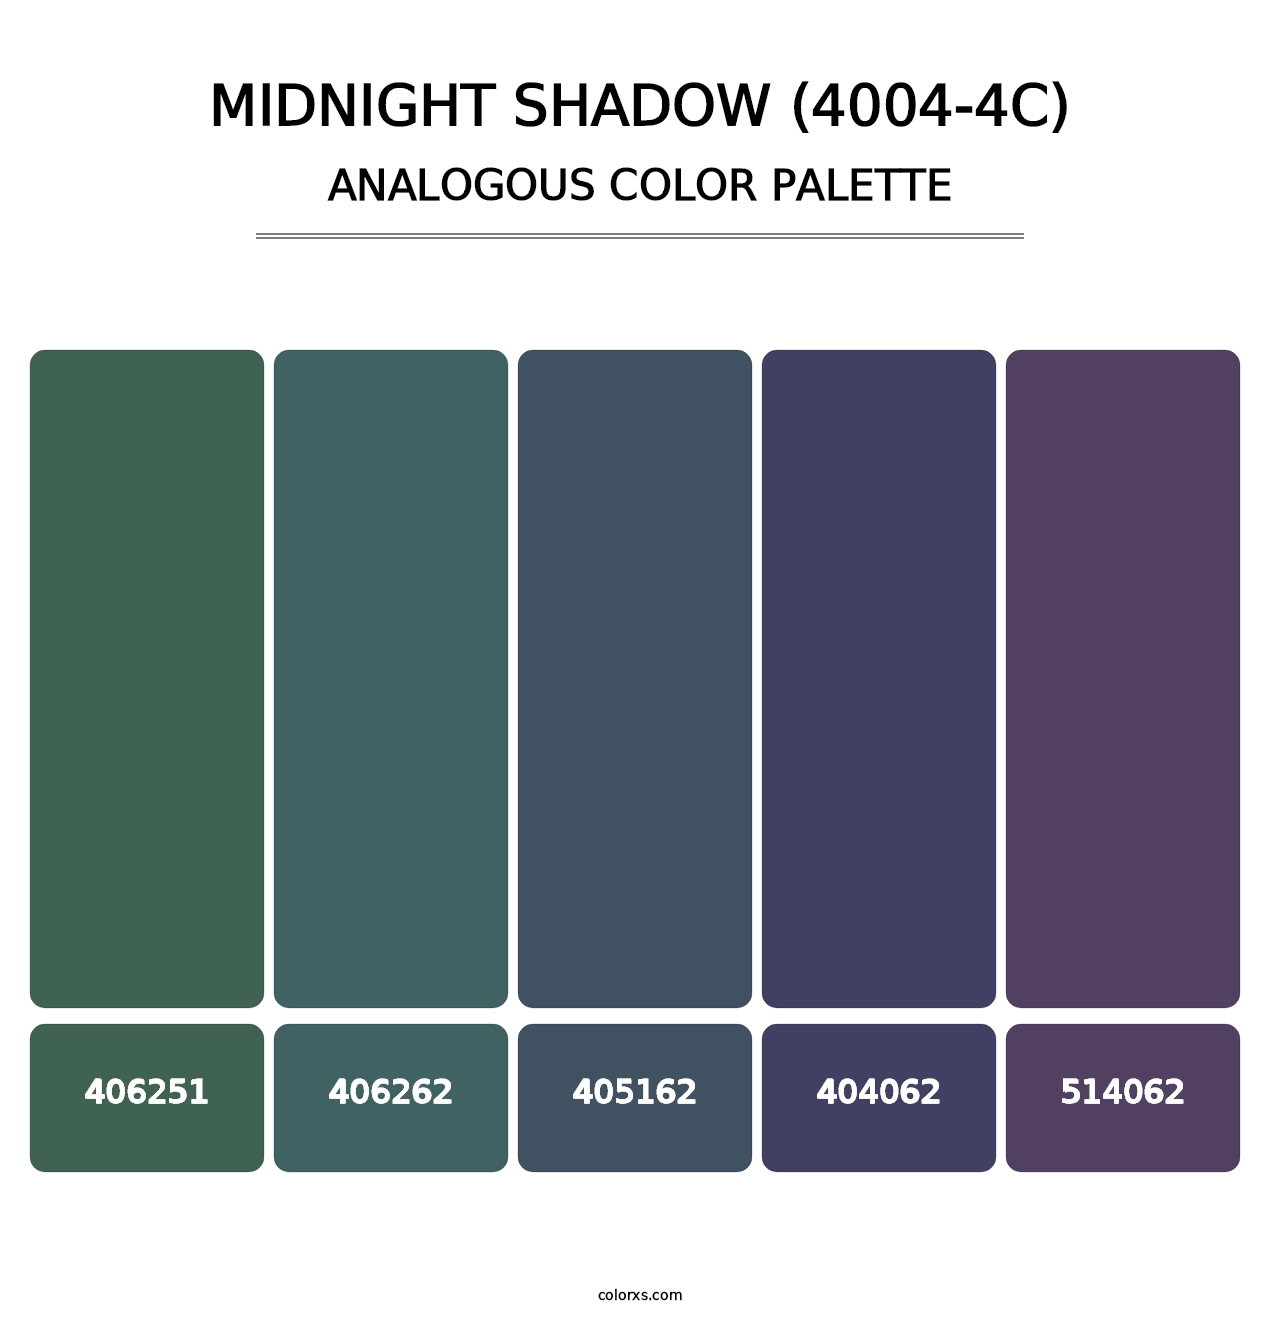 Midnight Shadow (4004-4C) - Analogous Color Palette